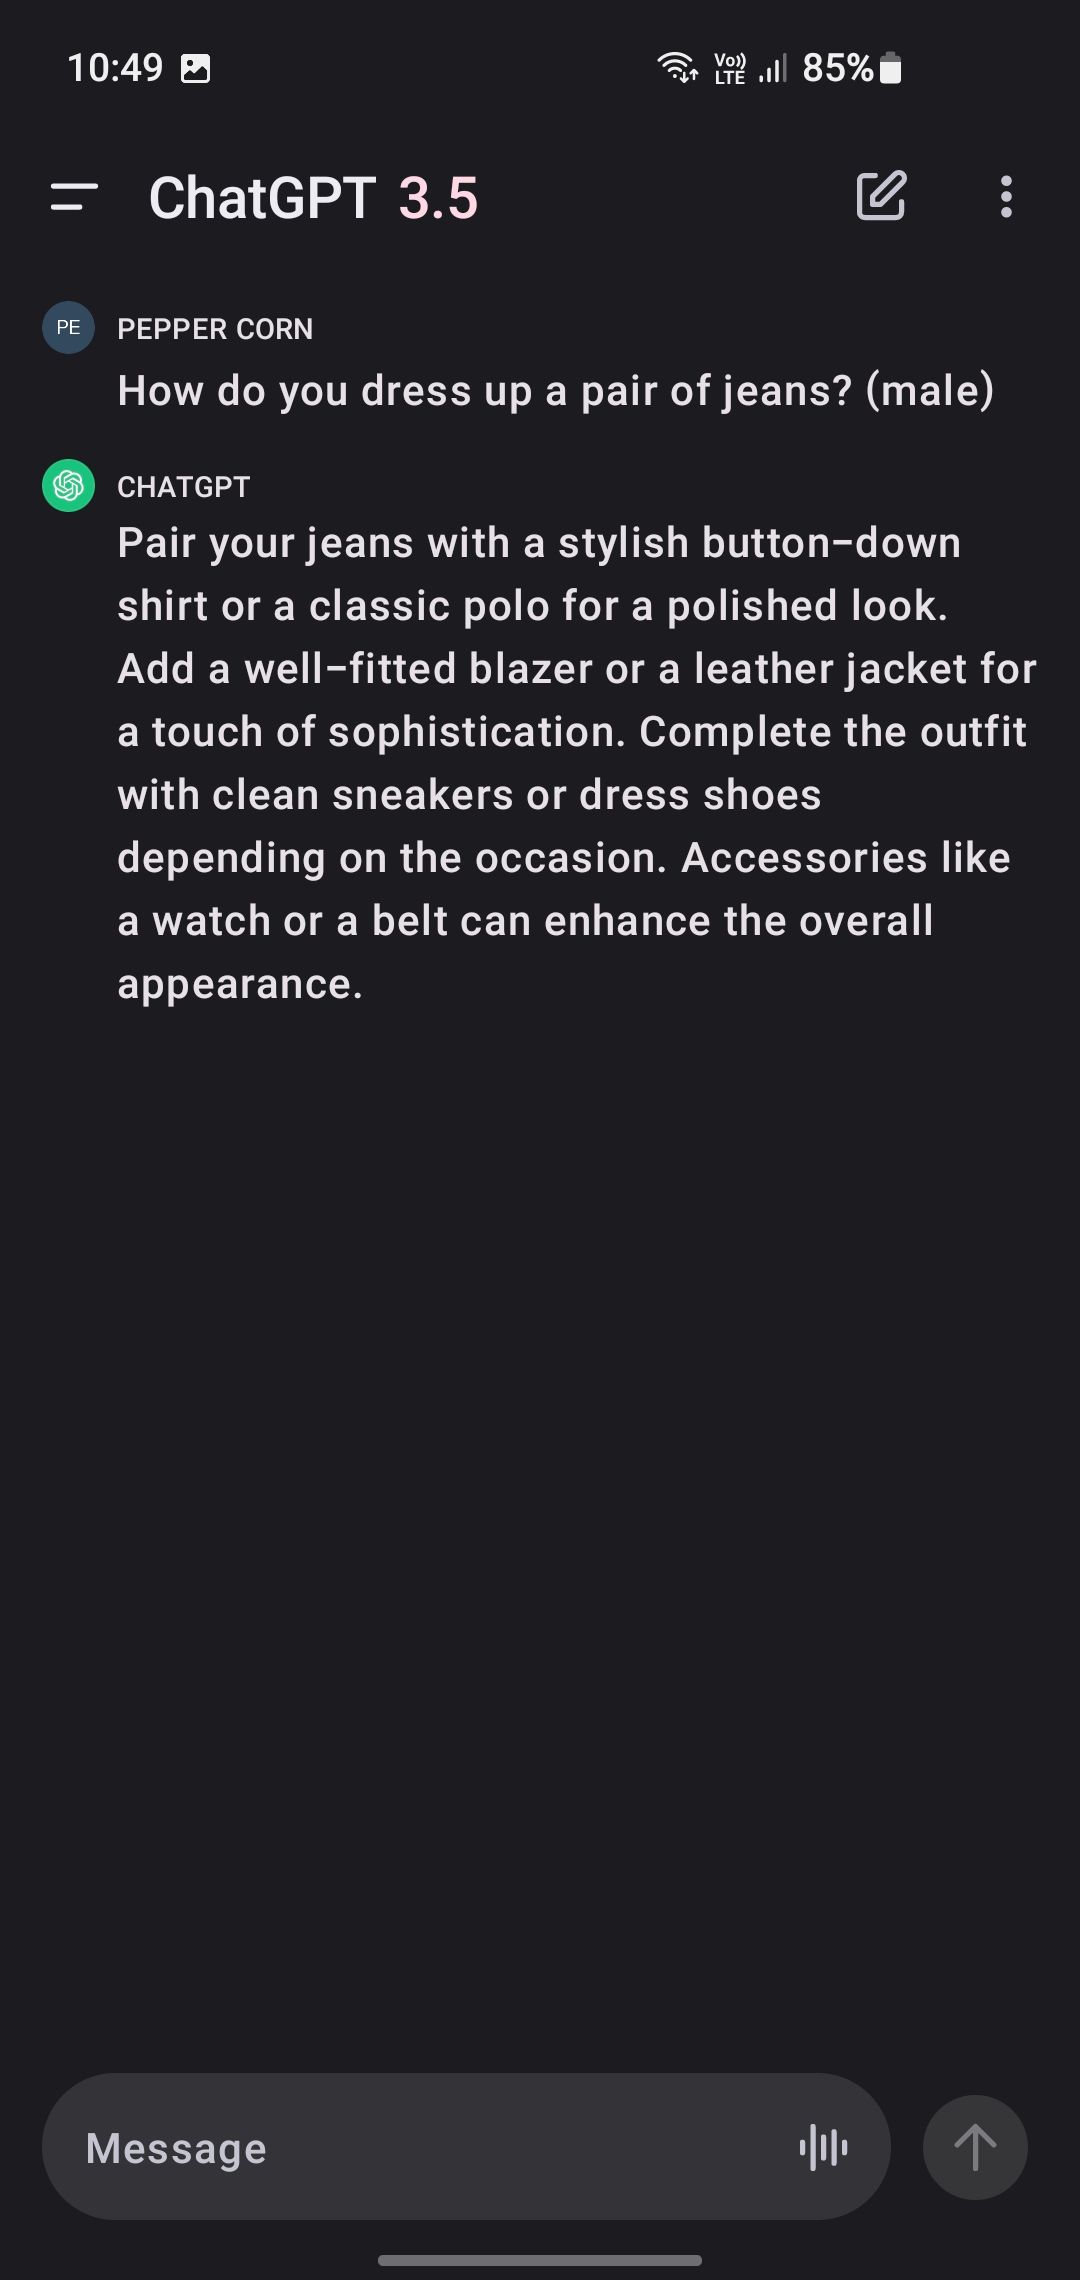 ChatGPT advice for dressing up jeans